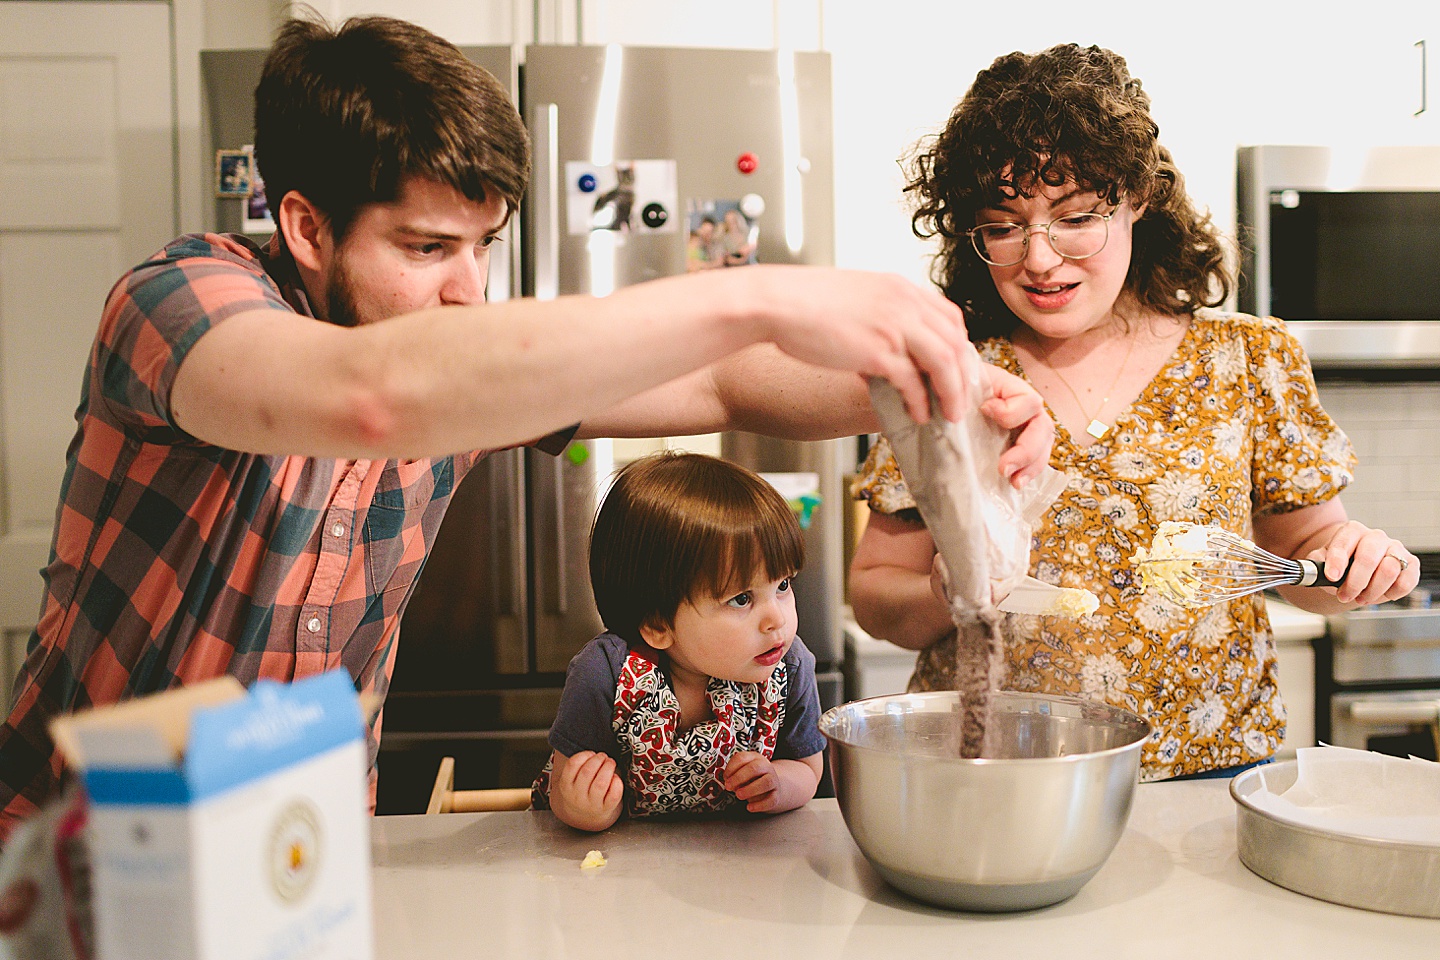 Toddler helps make brownies with parents